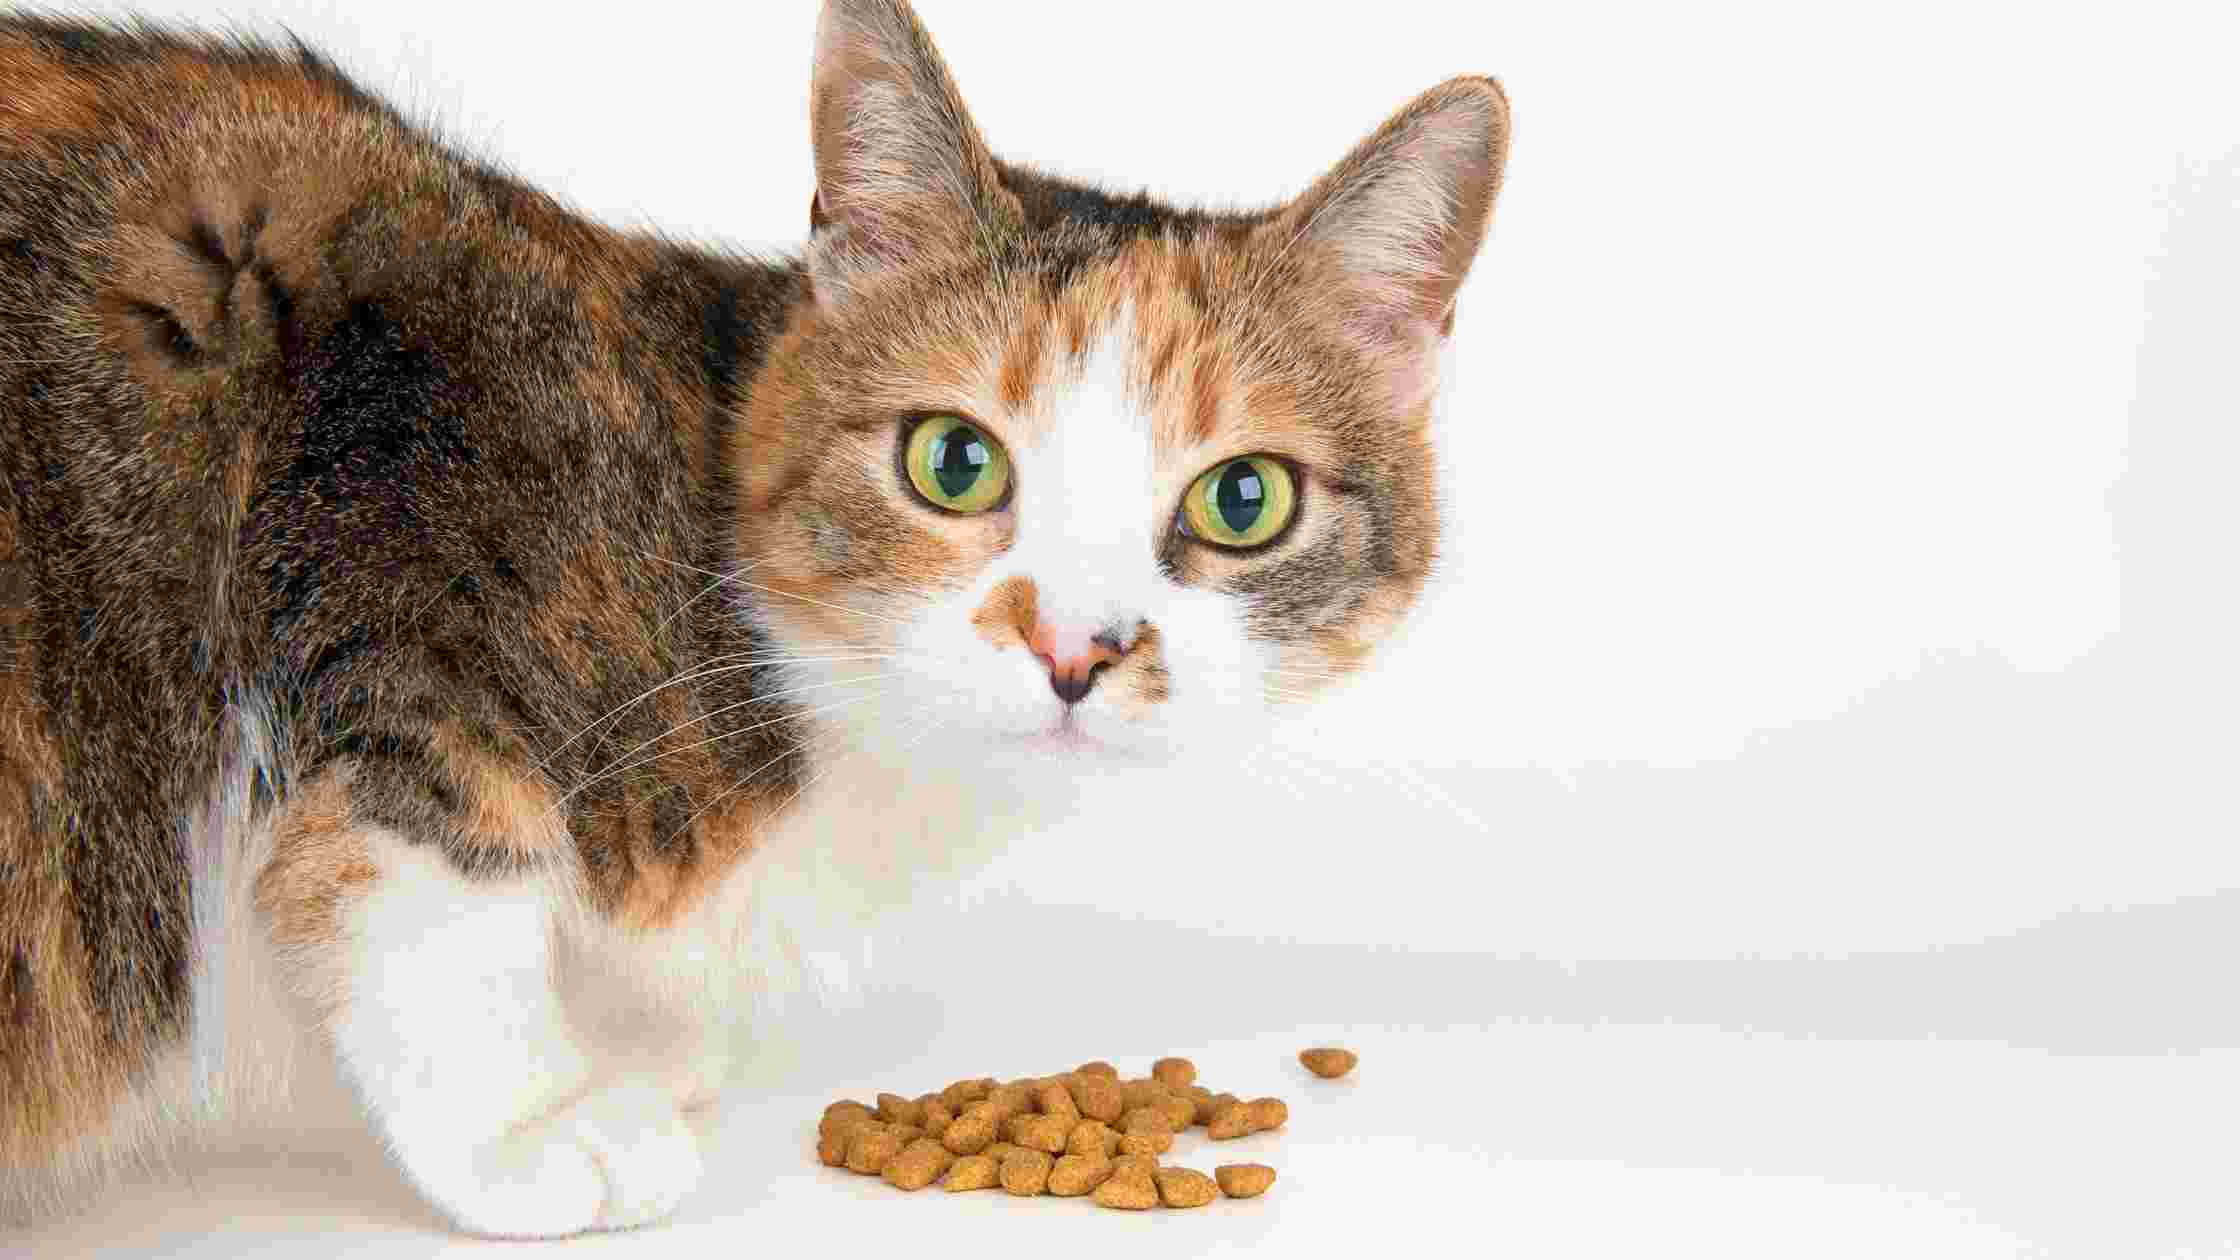 What ingredient in cat food causes urinary problems